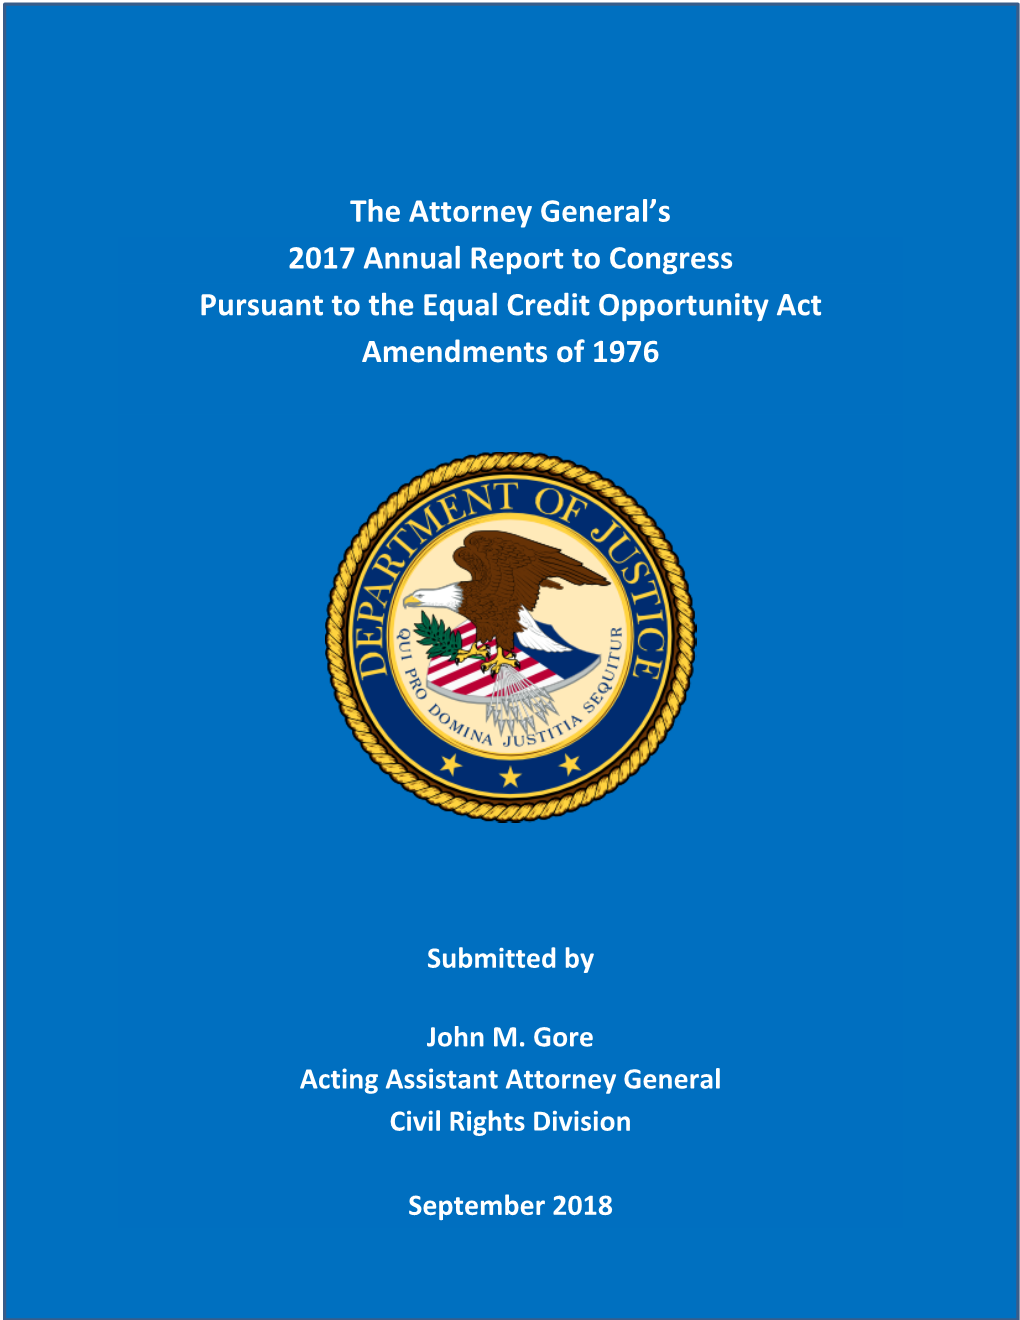 The Attorney General's 2017 Annual Report to Congress Pursuant to The